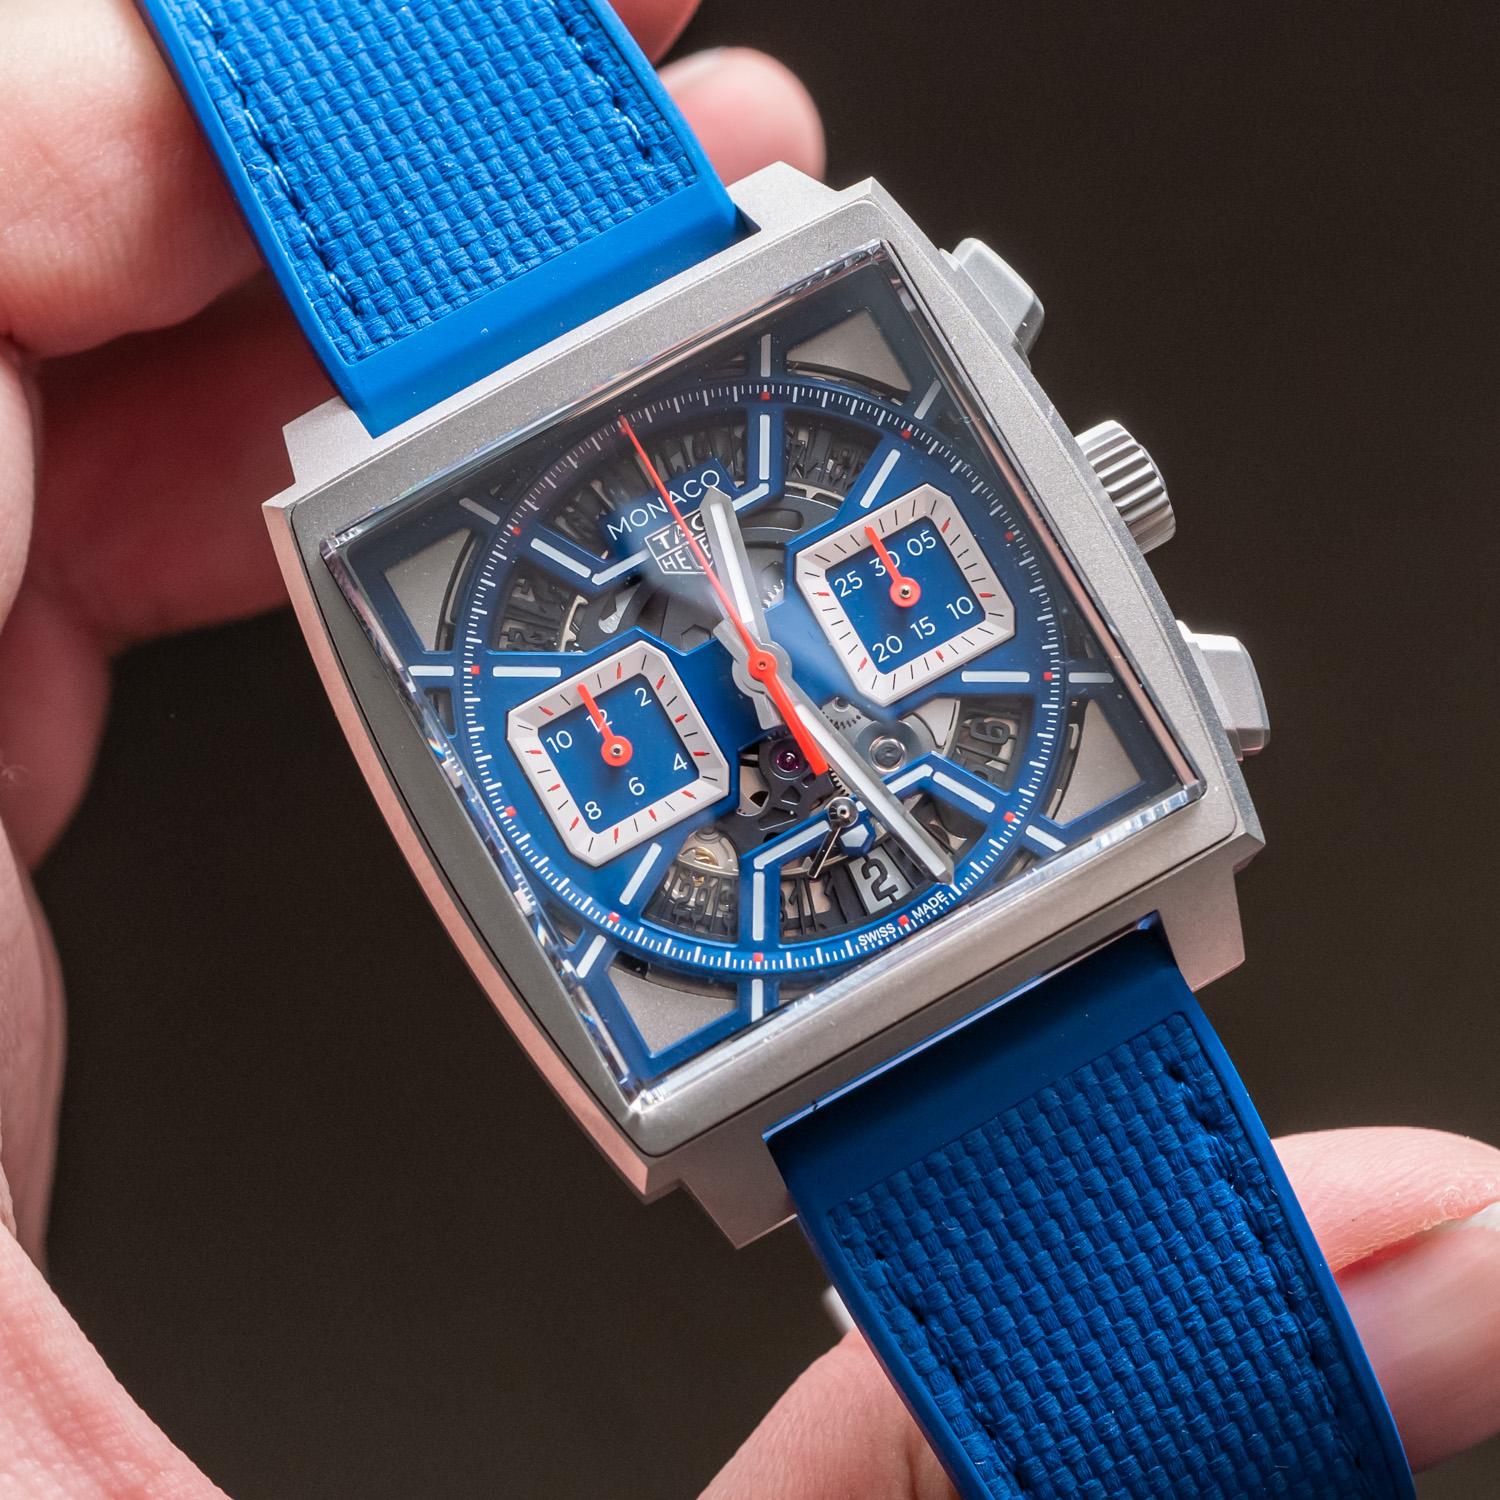 Introducing: TAG Heuer Monaco Chronograph Racing Blue Limited